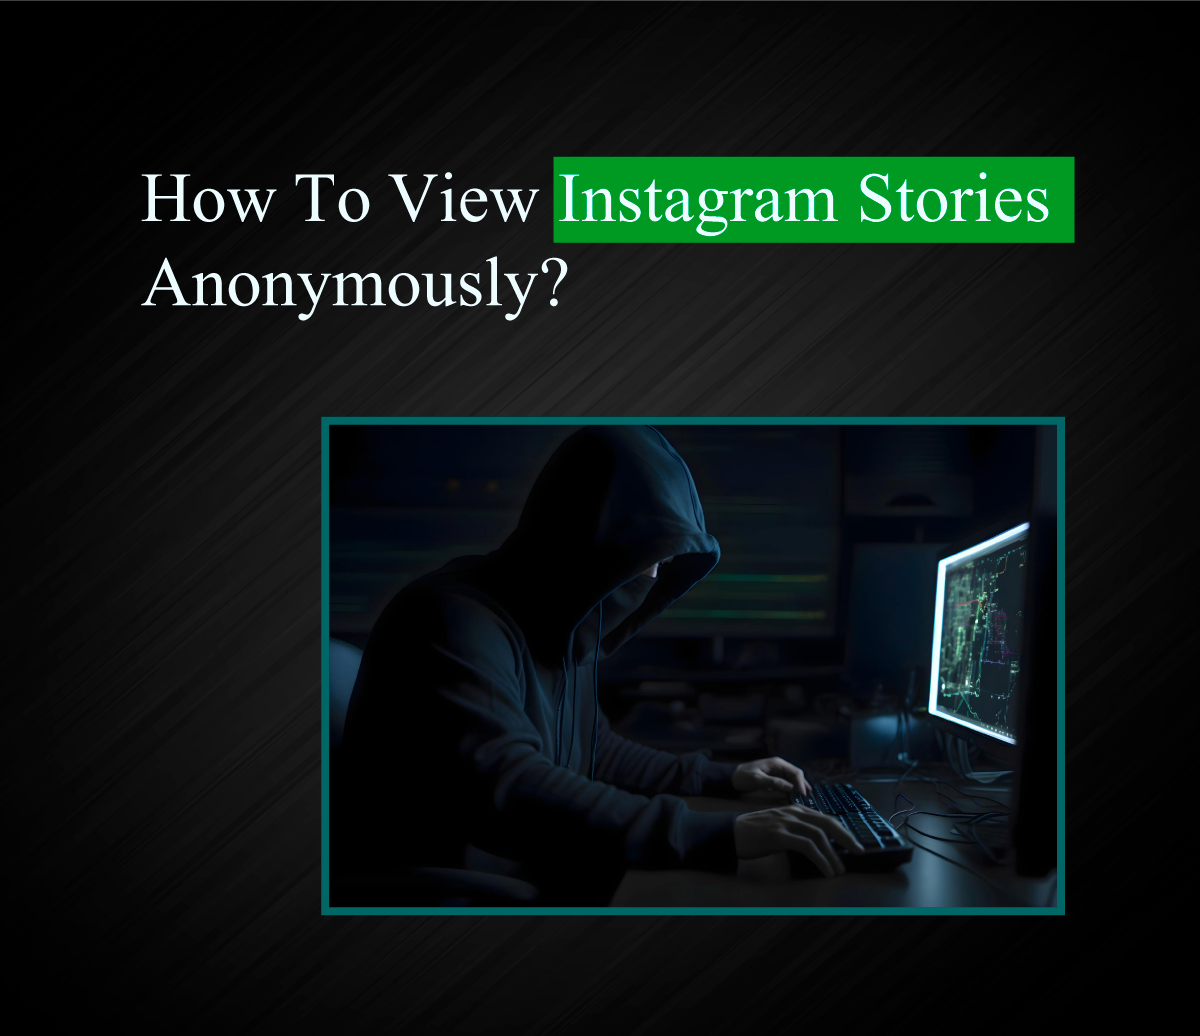 How To View Instagram Stories Anonymously?